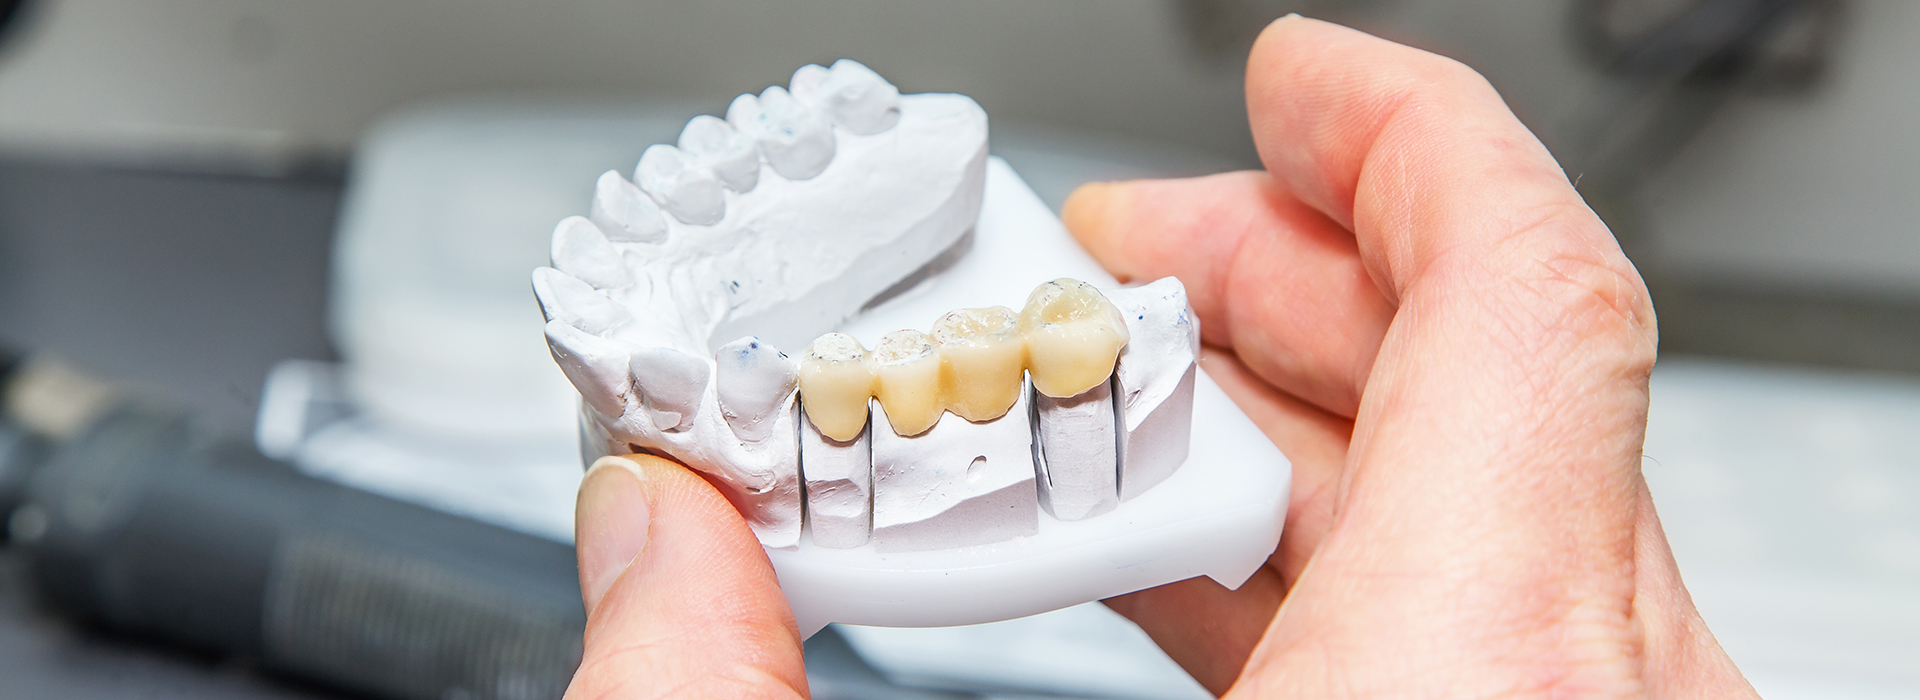 The image shows a person holding a 3D printed model of a human tooth with visible dental implants, likely for educational or demonstration purposes.